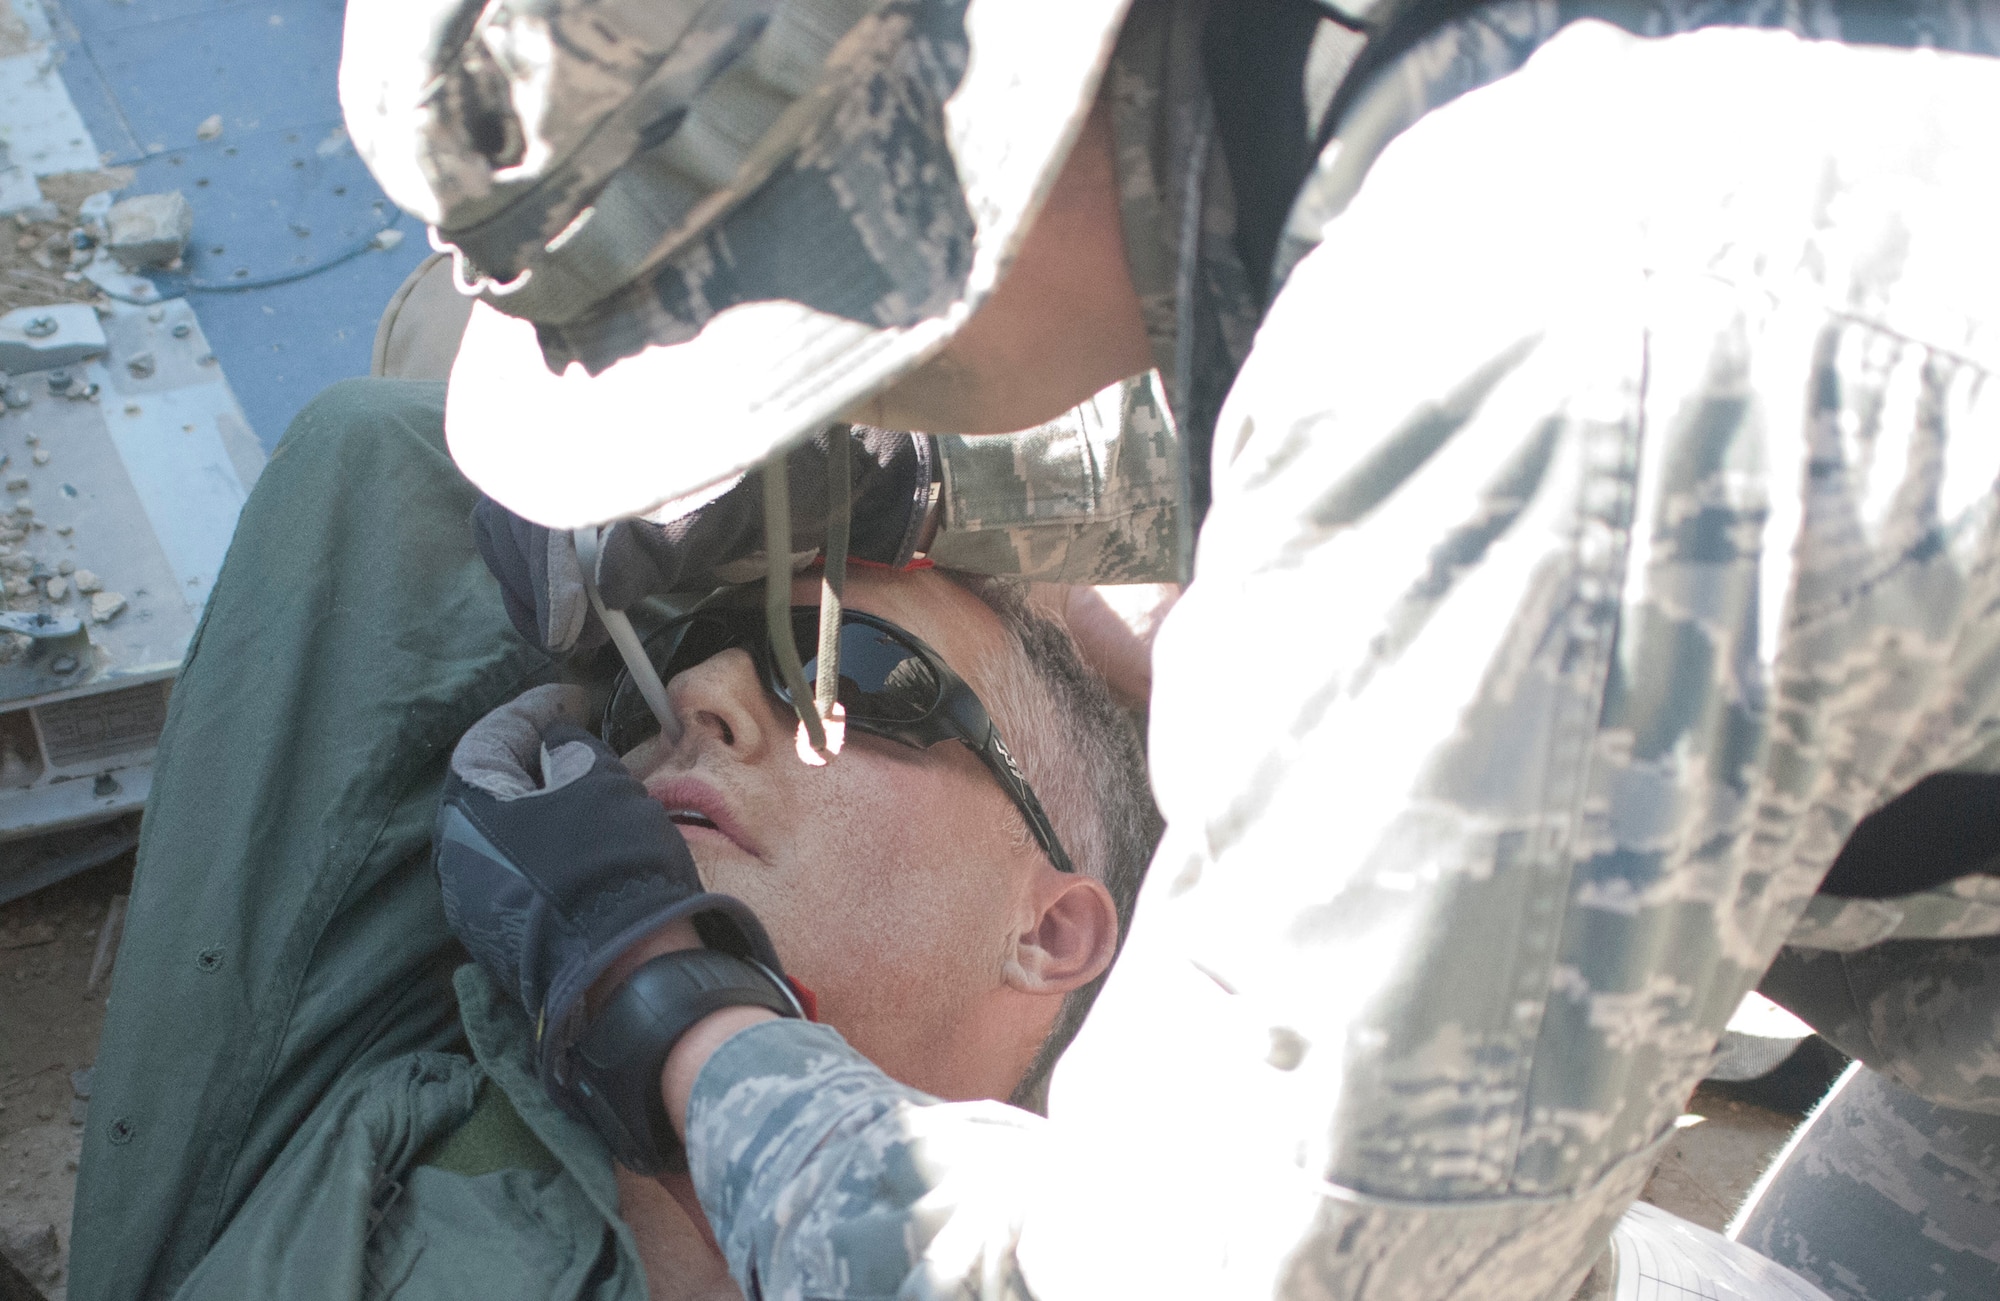 An Airman from the 460th Medical Group clears a patient’s airway during a training exercise Oct. 3, 2015, at Fort Carson, Colo. The 460th MDG completed annual combat leadership and combat medic training in order to prepare themselves for situations they could find themselves in while deployed in a hostile environment. (Courtesy photo) 